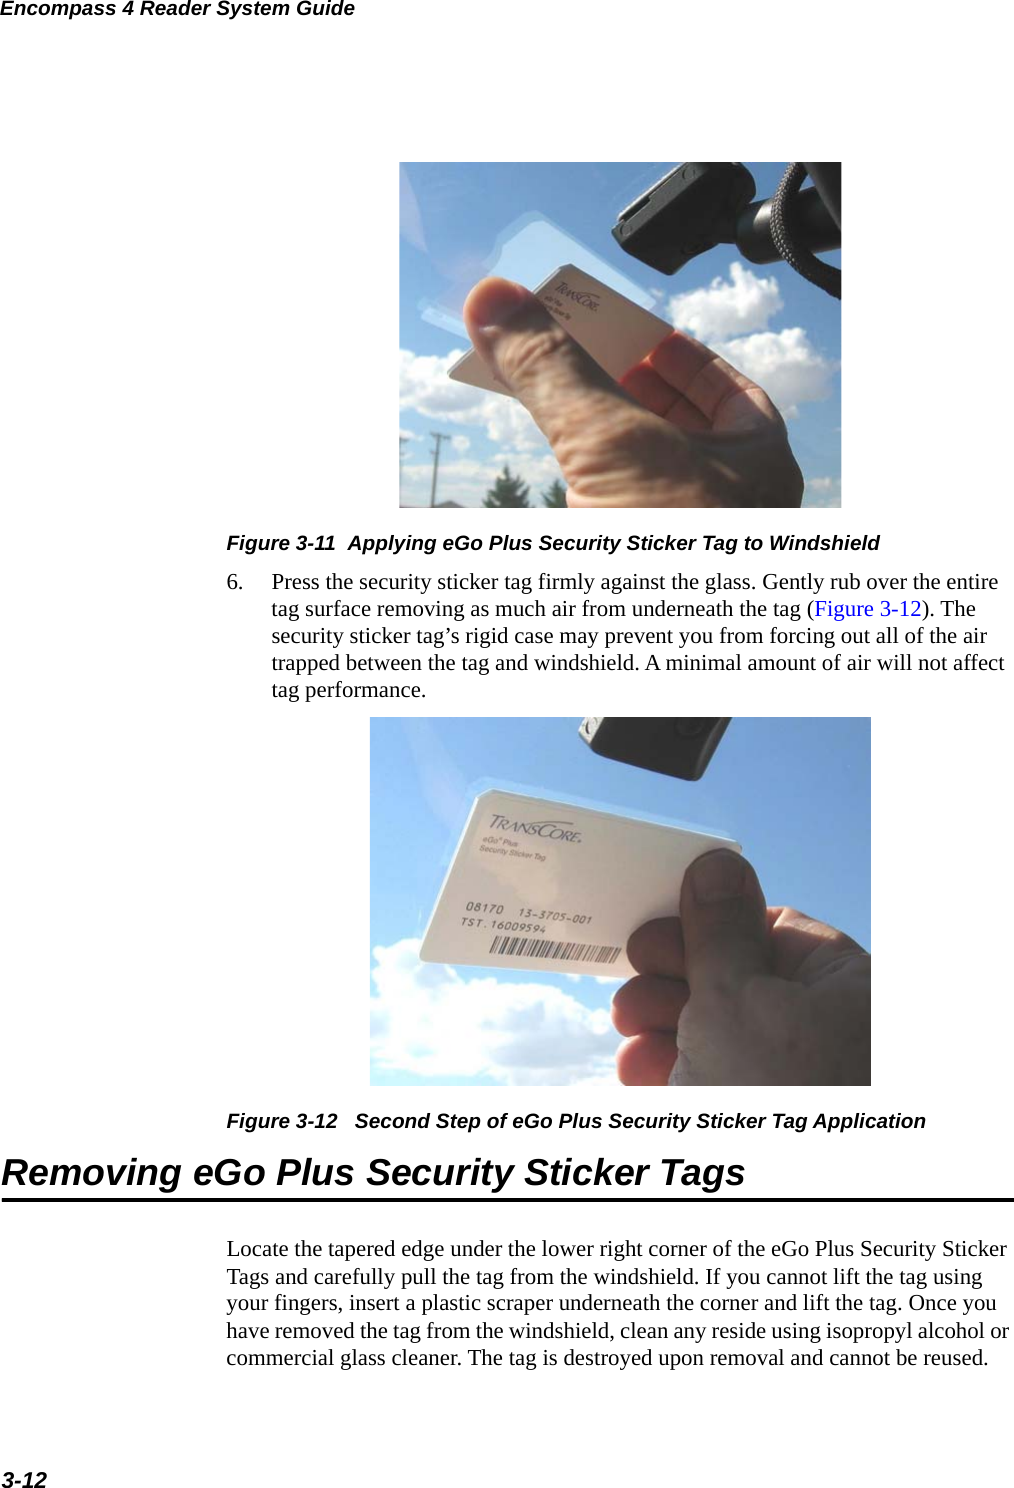 Encompass 4 Reader System Guide3-12Figure 3-11  Applying eGo Plus Security Sticker Tag to Windshield6. Press the security sticker tag firmly against the glass. Gently rub over the entire tag surface removing as much air from underneath the tag (Figure 3-12). The security sticker tag’s rigid case may prevent you from forcing out all of the air trapped between the tag and windshield. A minimal amount of air will not affect tag performance.Figure 3-12   Second Step of eGo Plus Security Sticker Tag ApplicationRemoving eGo Plus Security Sticker TagsLocate the tapered edge under the lower right corner of the eGo Plus Security Sticker Tags and carefully pull the tag from the windshield. If you cannot lift the tag using your fingers, insert a plastic scraper underneath the corner and lift the tag. Once you have removed the tag from the windshield, clean any reside using isopropyl alcohol or commercial glass cleaner. The tag is destroyed upon removal and cannot be reused.